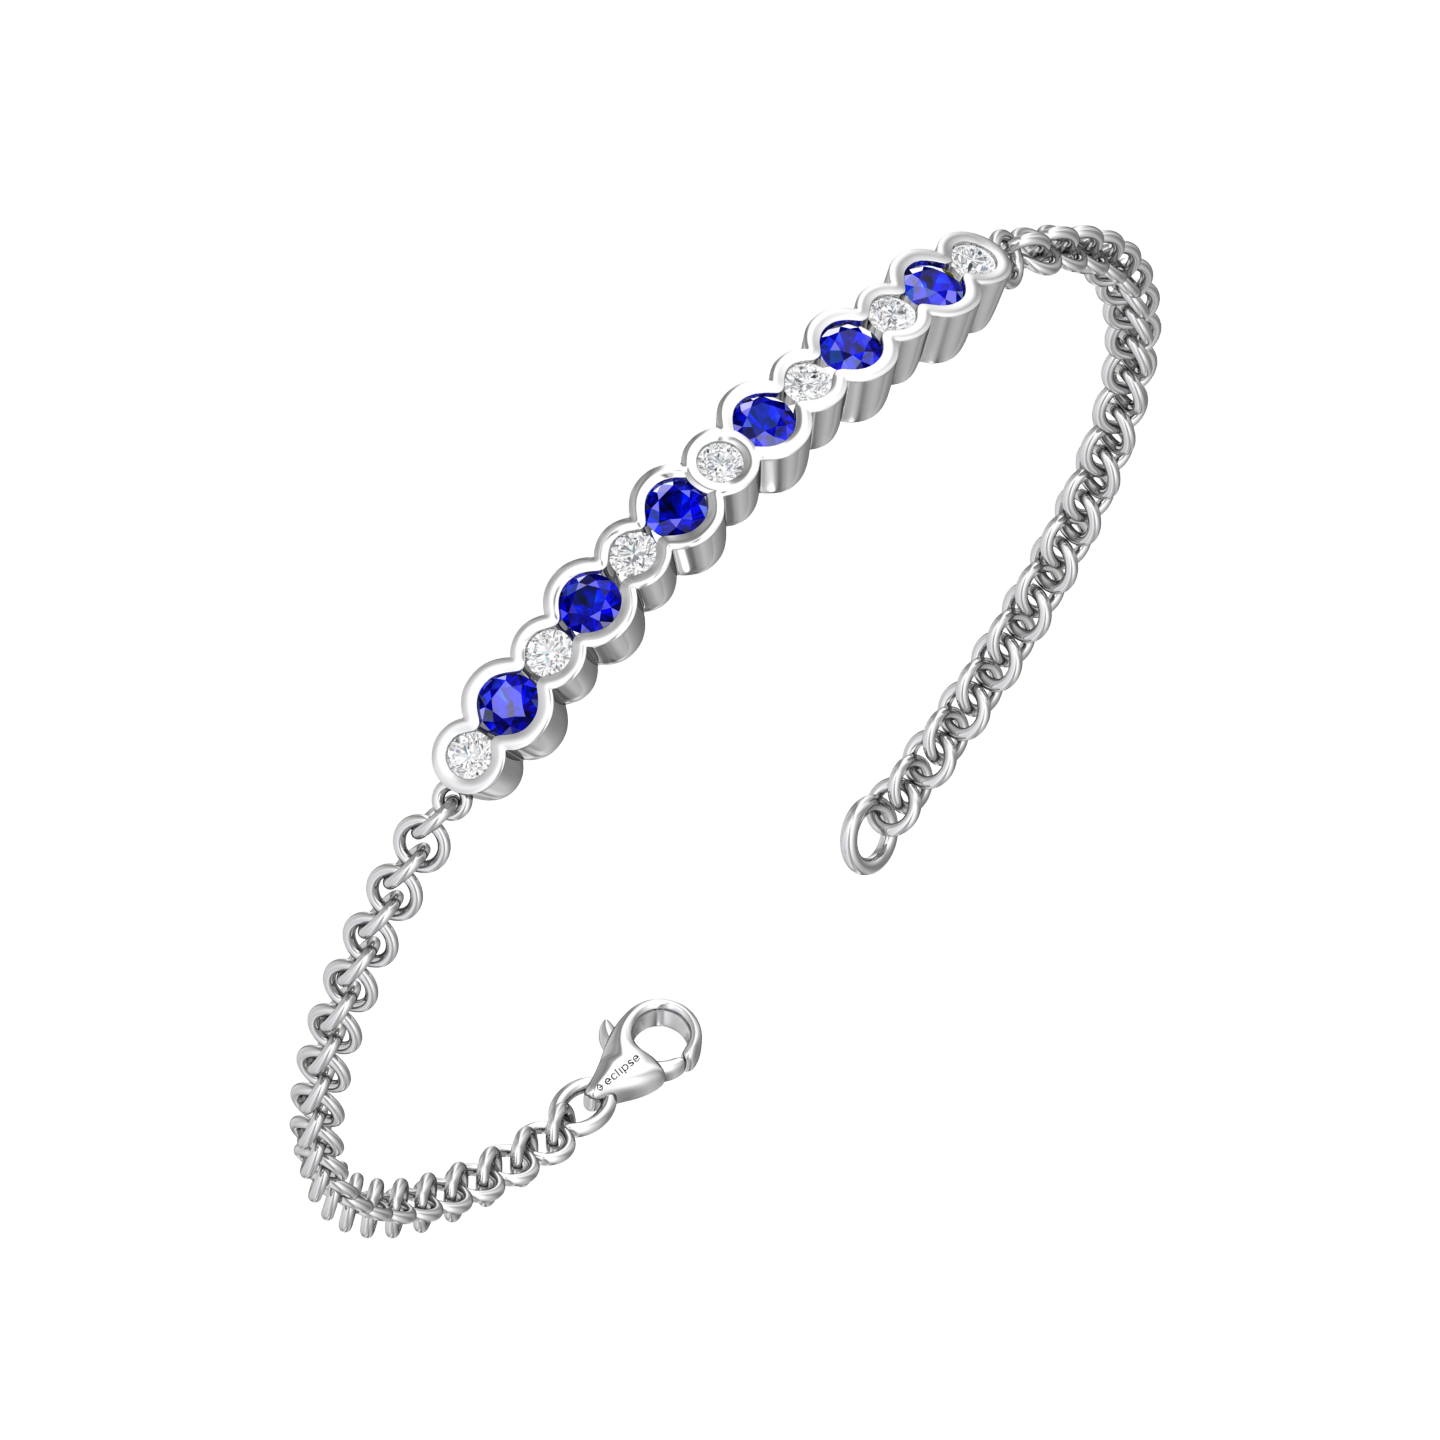 Eclipse Collection Sapphire and Diamond Bracelet  Gardiner Brothers 18ct White Gold  